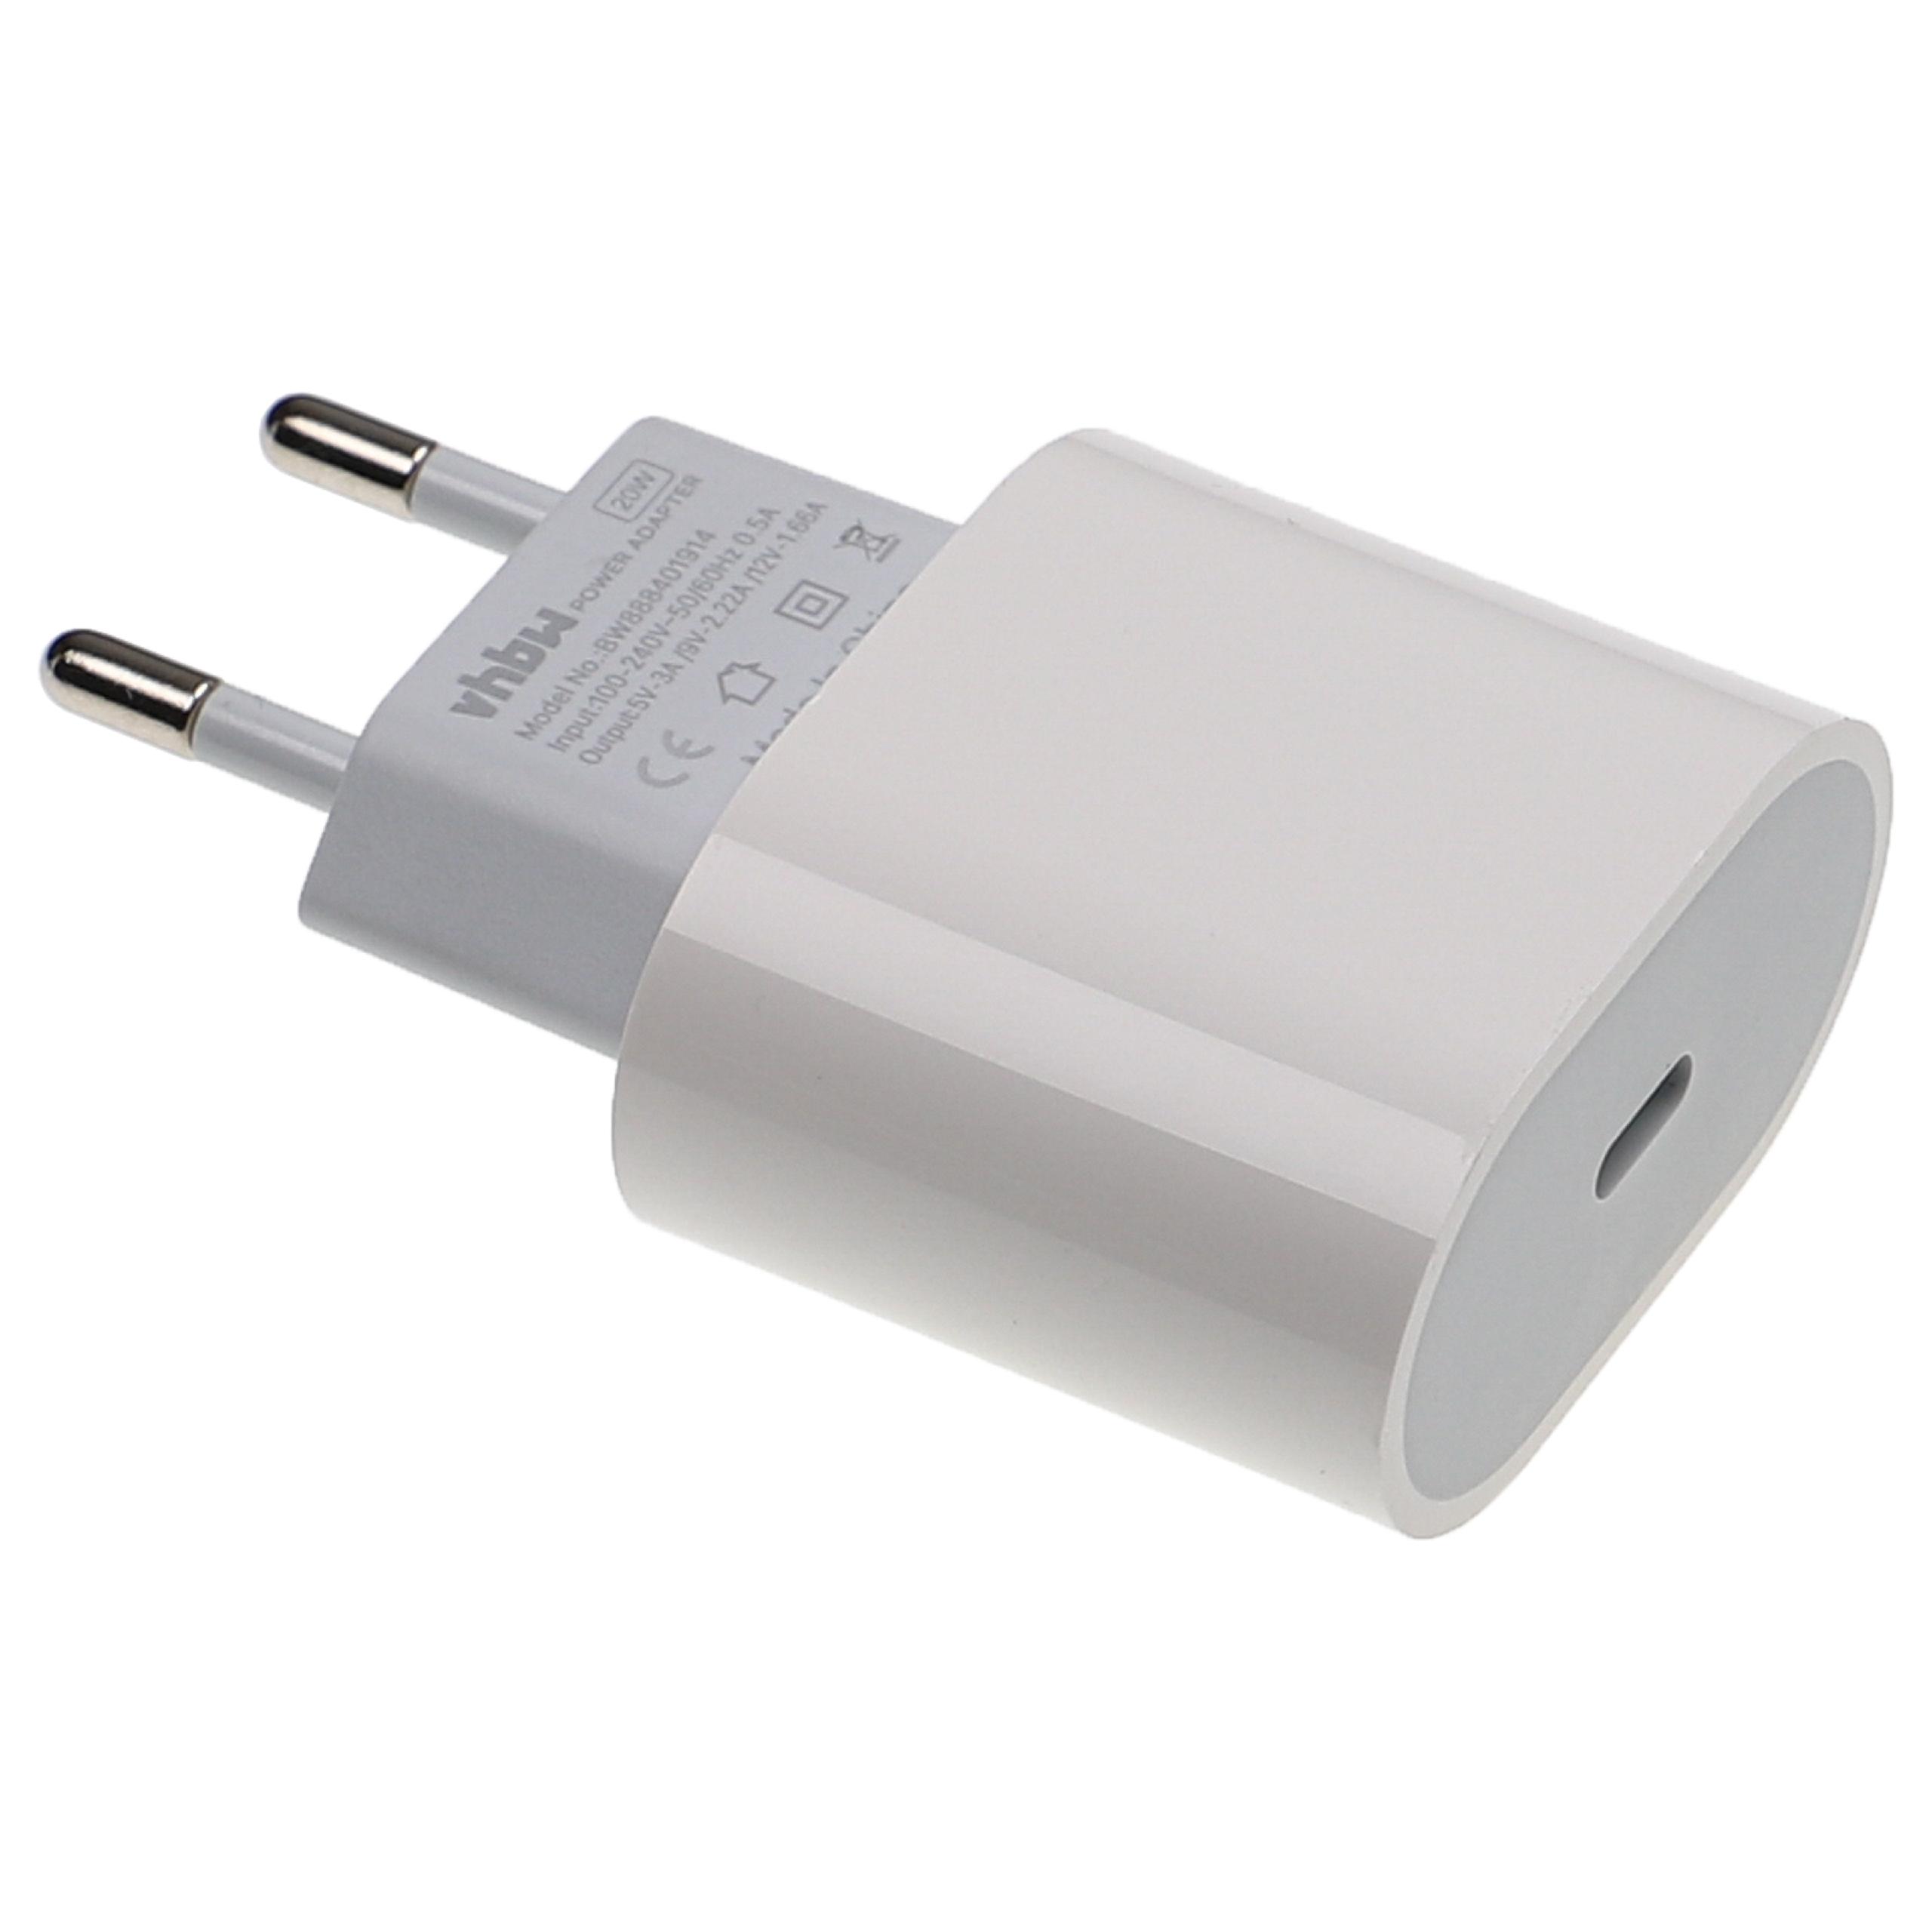 USB C USB Power Adapter for Smartphones, Mobile Phones, Tablets - USB Chargers, 9 / 12 / 5 V Adapter